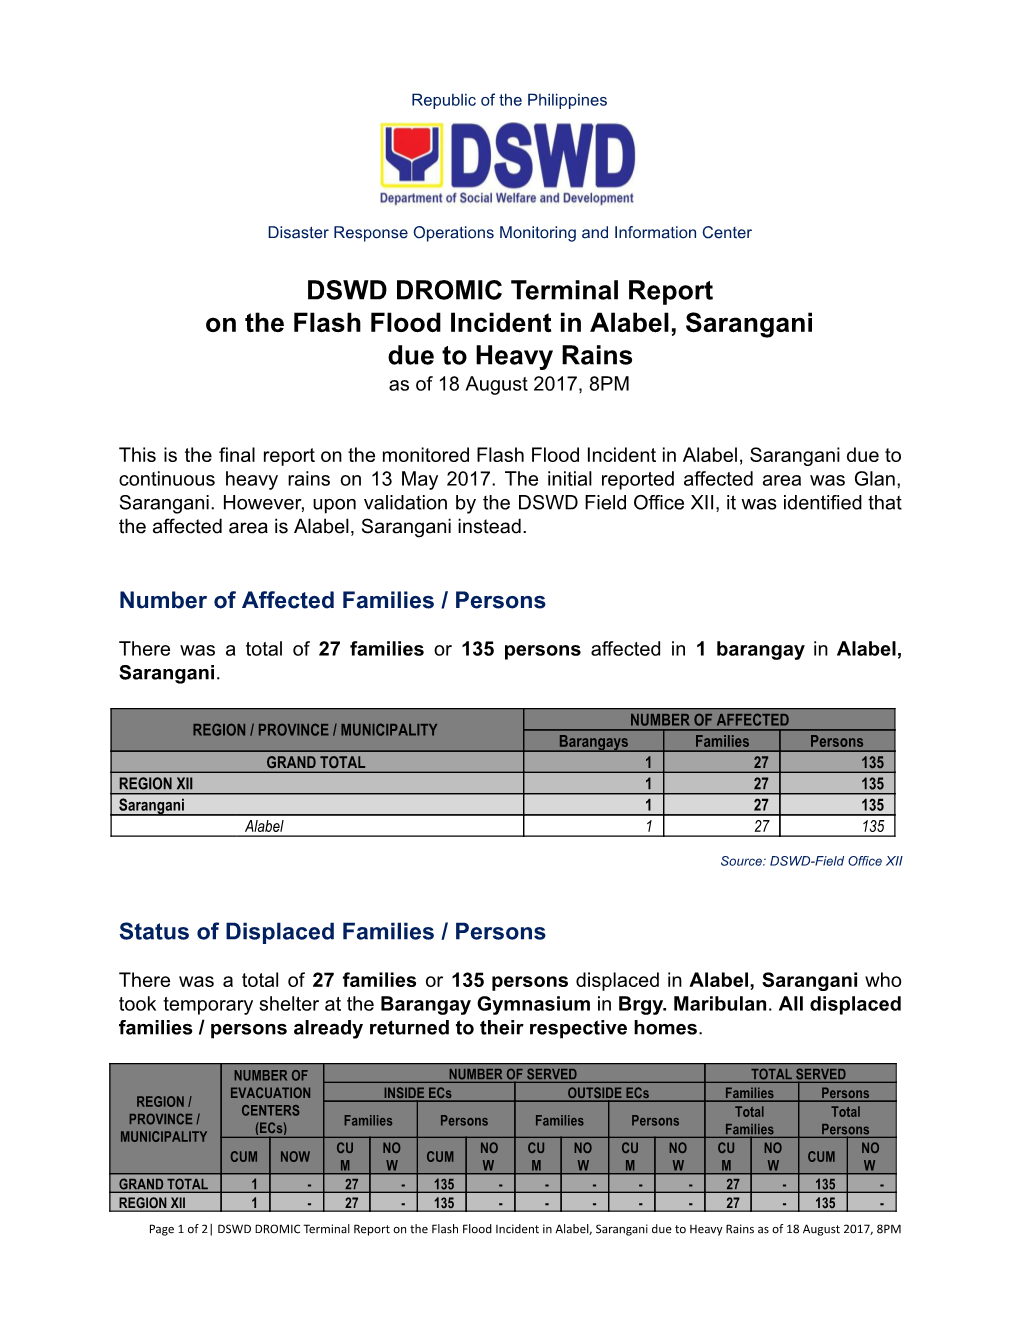 DSWD DROMIC Terminal Report on the Flash Flood Incident in Alabel, Sarangani Due to Heavy Rains As of 18 August 2017, 8PM